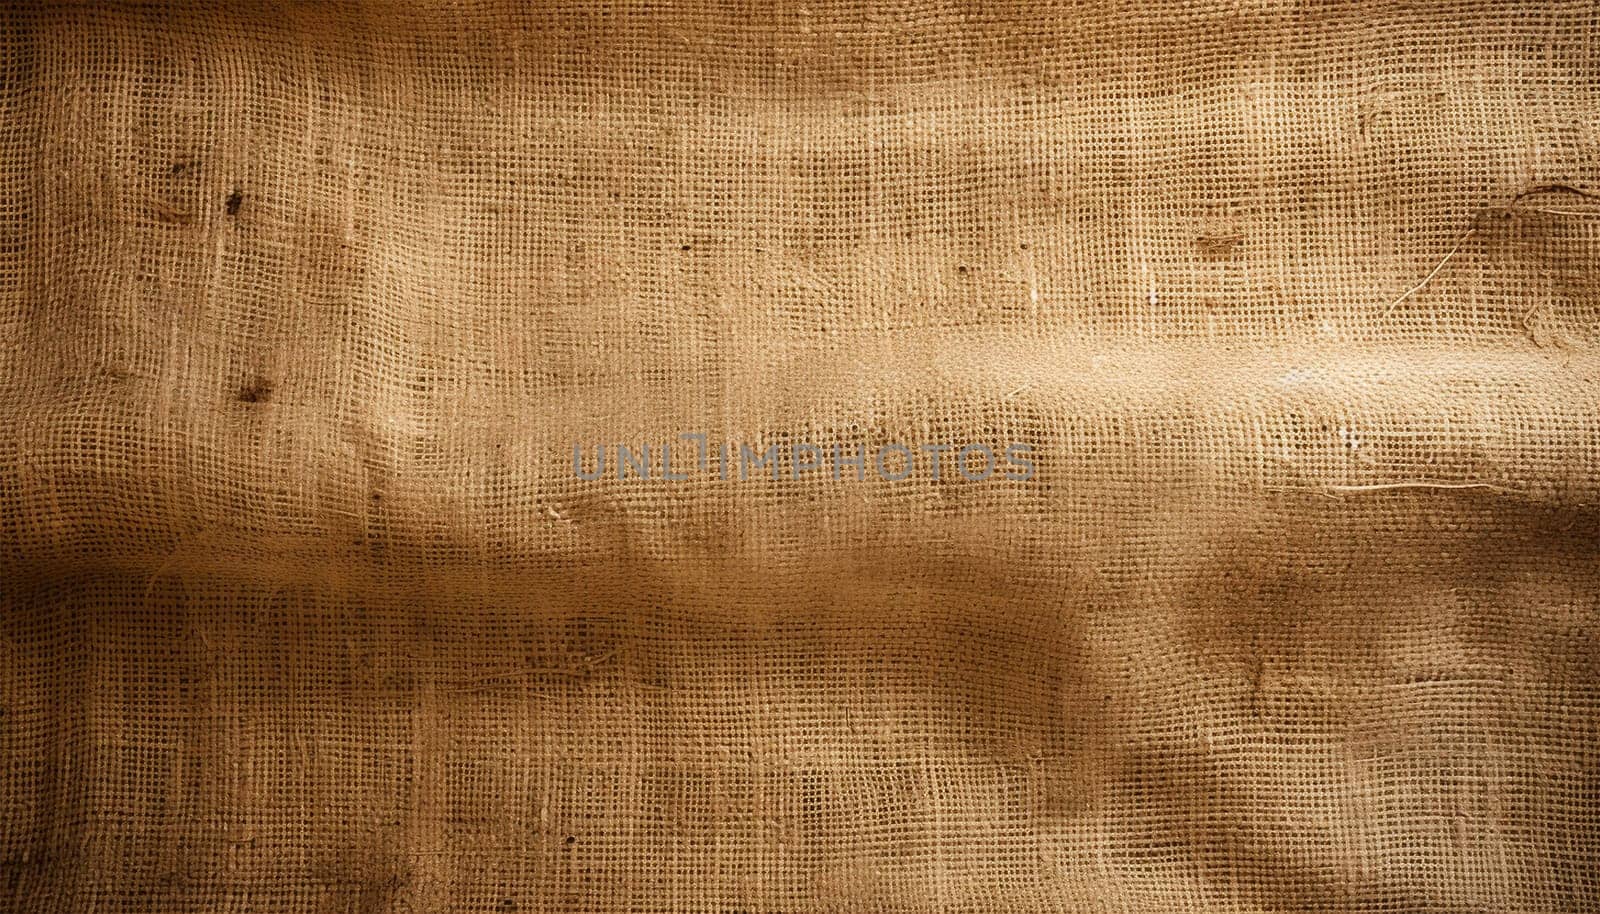 Burlap brown natural Cream French Linen Texture Border Background. Old Ecru Flax Fibre Seamless Pattern. Organic Yarn Close Up Weave Fabric Ribbon Trim Banner. Sack Cloth Packaging, Canvas Edging. copy space